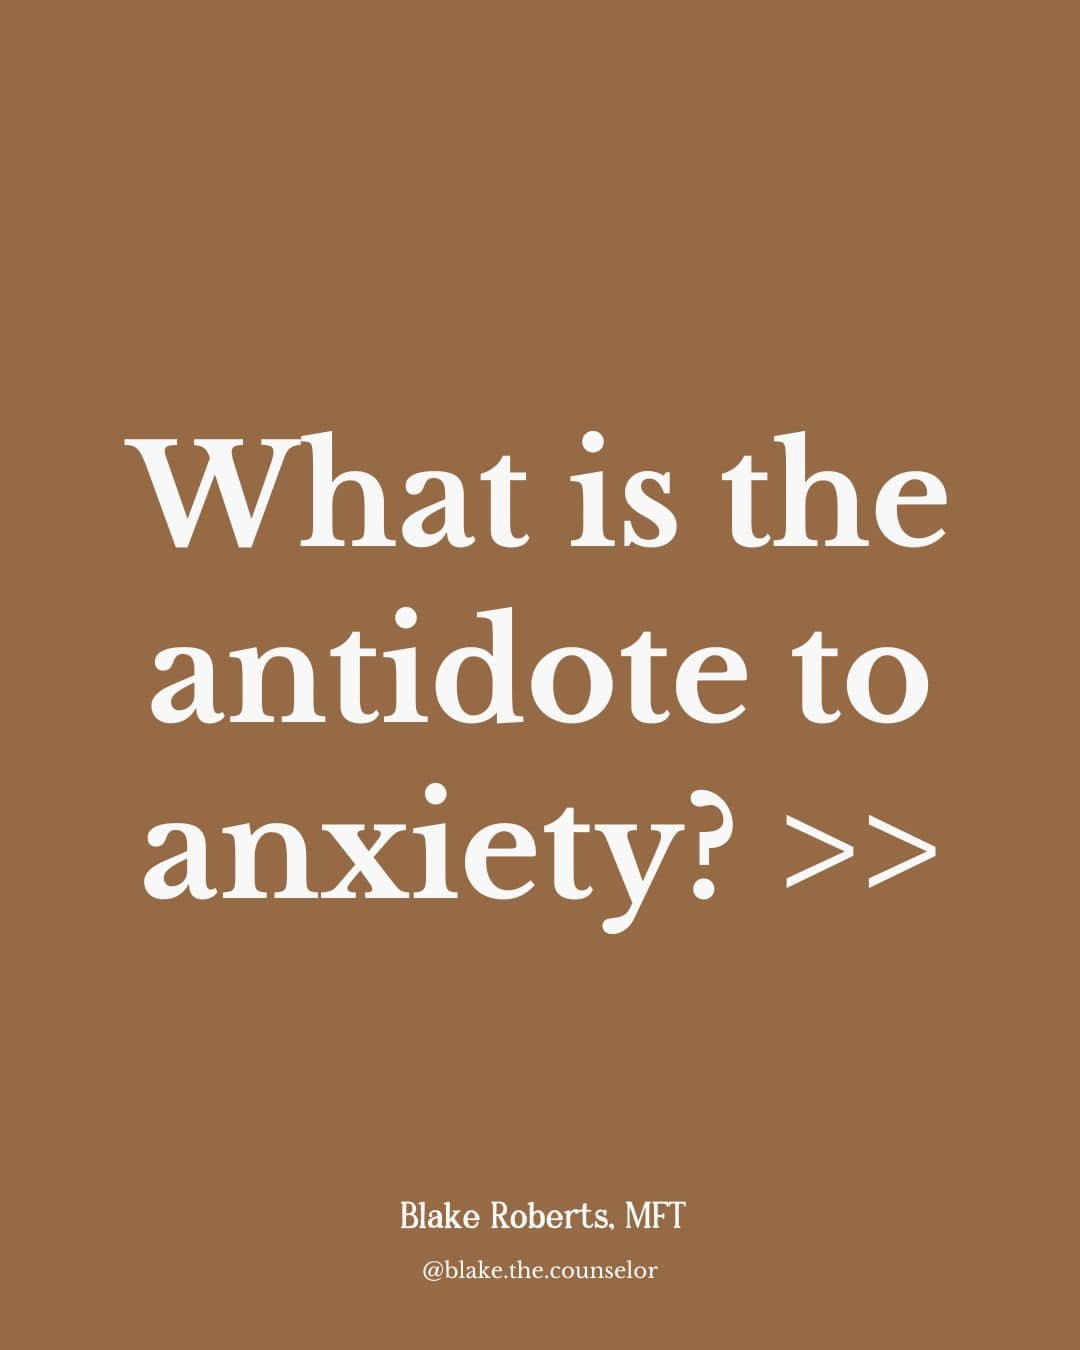 If you've ever googled &quot;how to overcome anxiety&quot;...

You might have seen something along the lines of &quot;the antidote to anxiety is action.&quot; 

Which isn't necessarily wrong, but it can also communicate that anxiety is bad and you ju